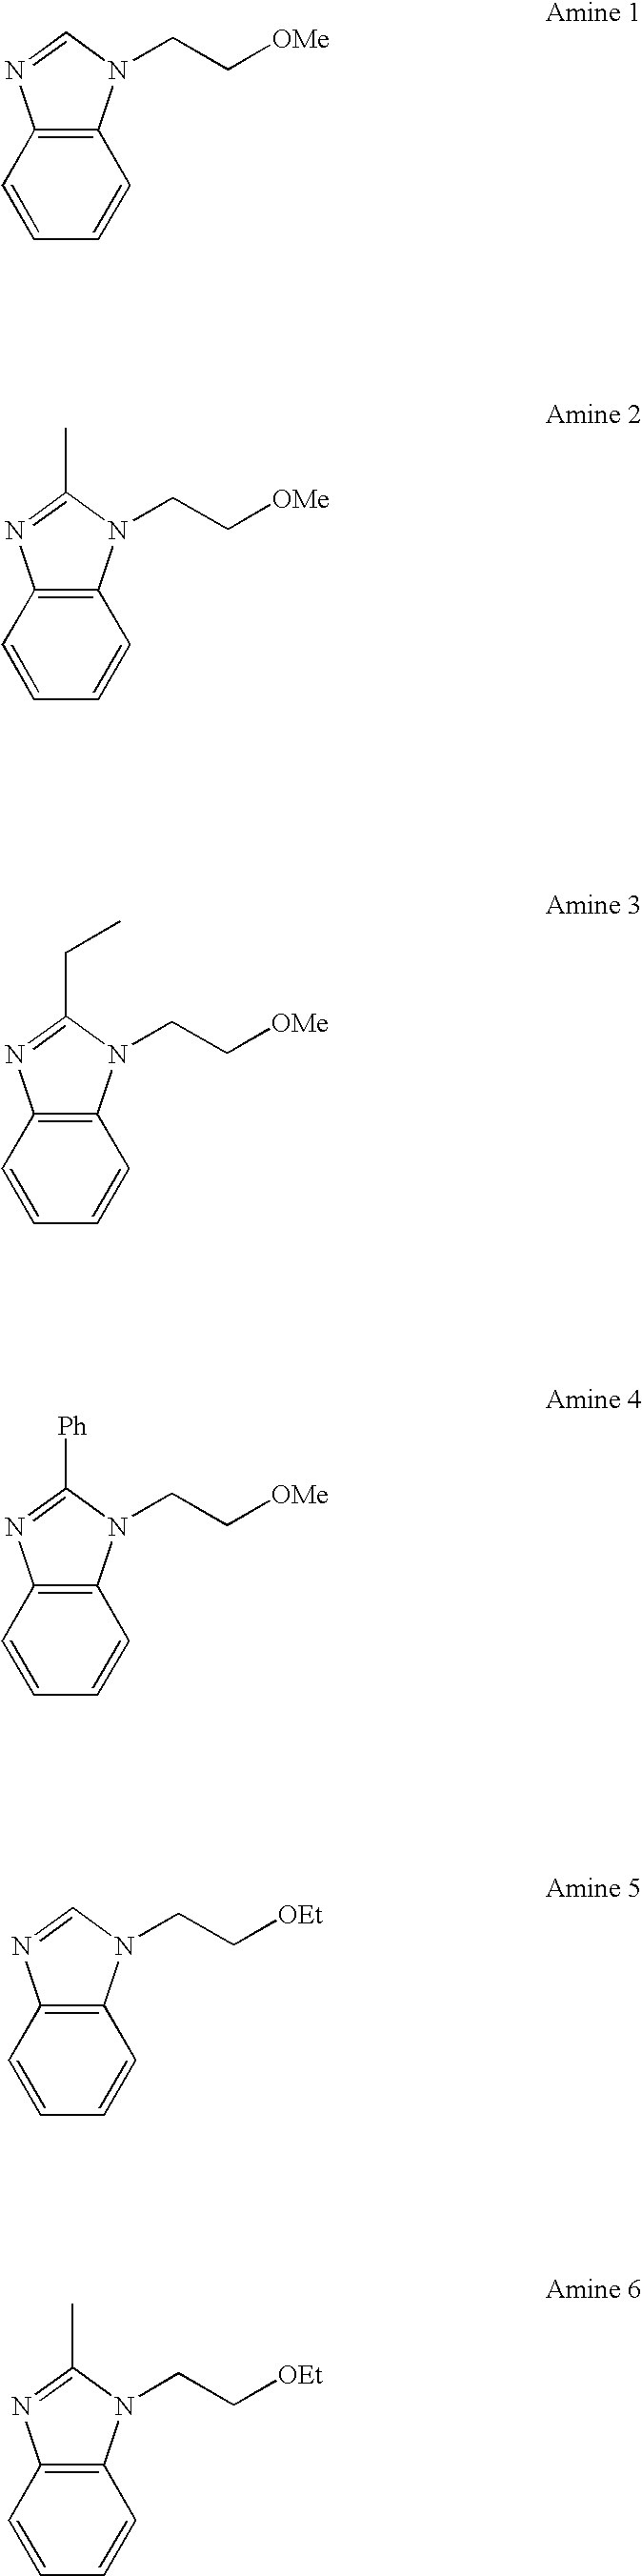 Nitrogen-containing organic compound, resist composition and patterning process